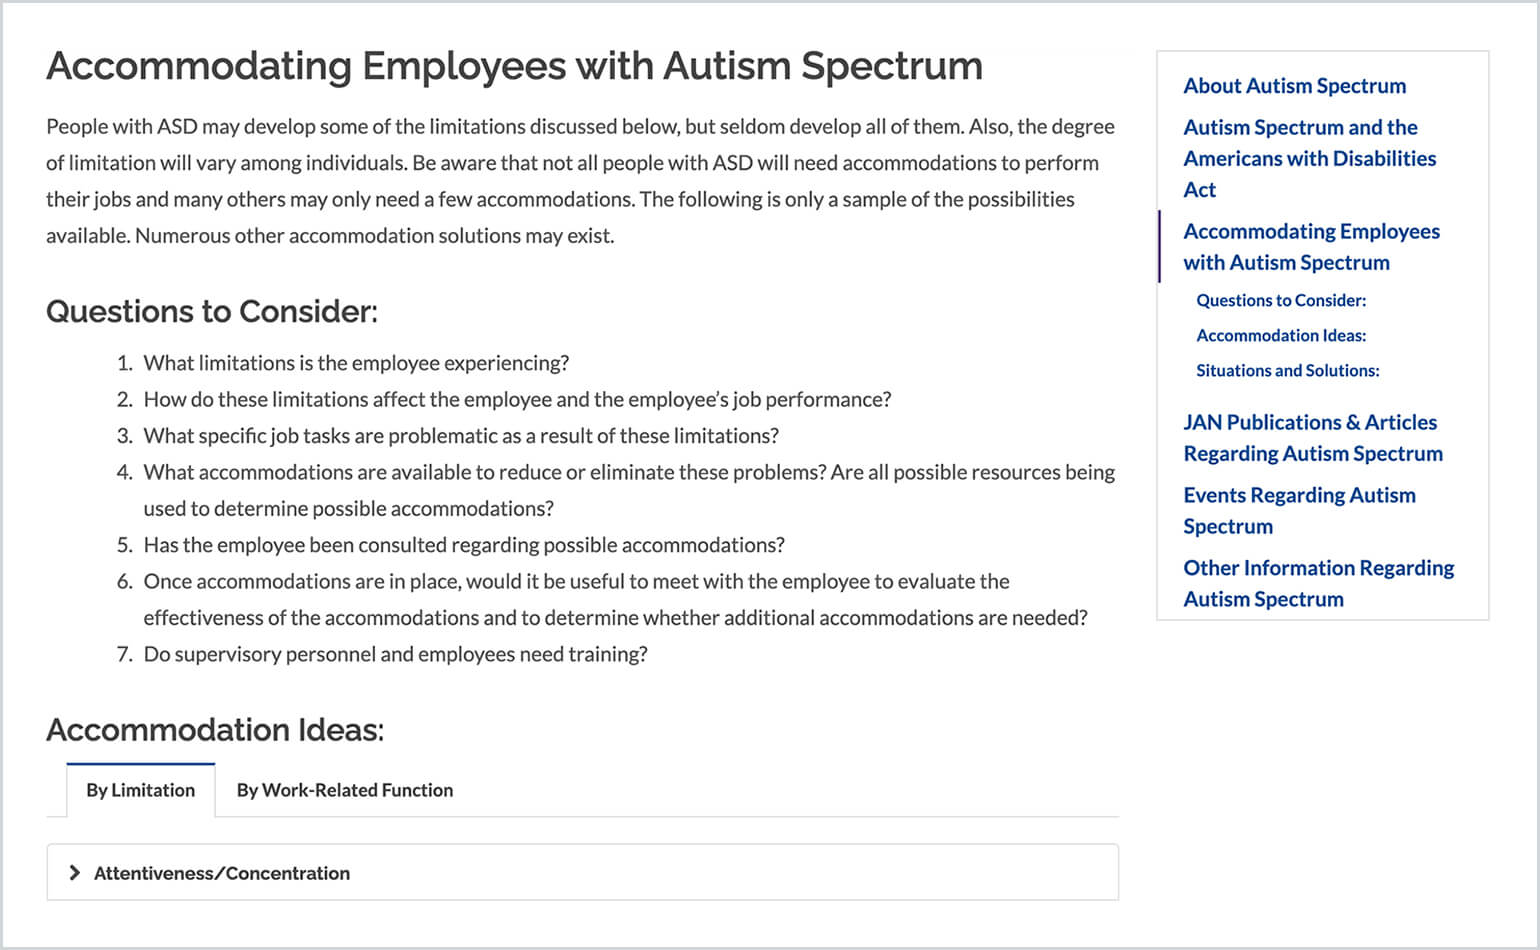 An image of the JAN page for the Autism Spectrum is shown. It is scrolled down to the section labeled 'Accommodating Employees with Autism Spectrum.' There is a description of how autism may affect someone in the workplace, questions to consider, and Accommodation ideas separated by limitation and work-related function.